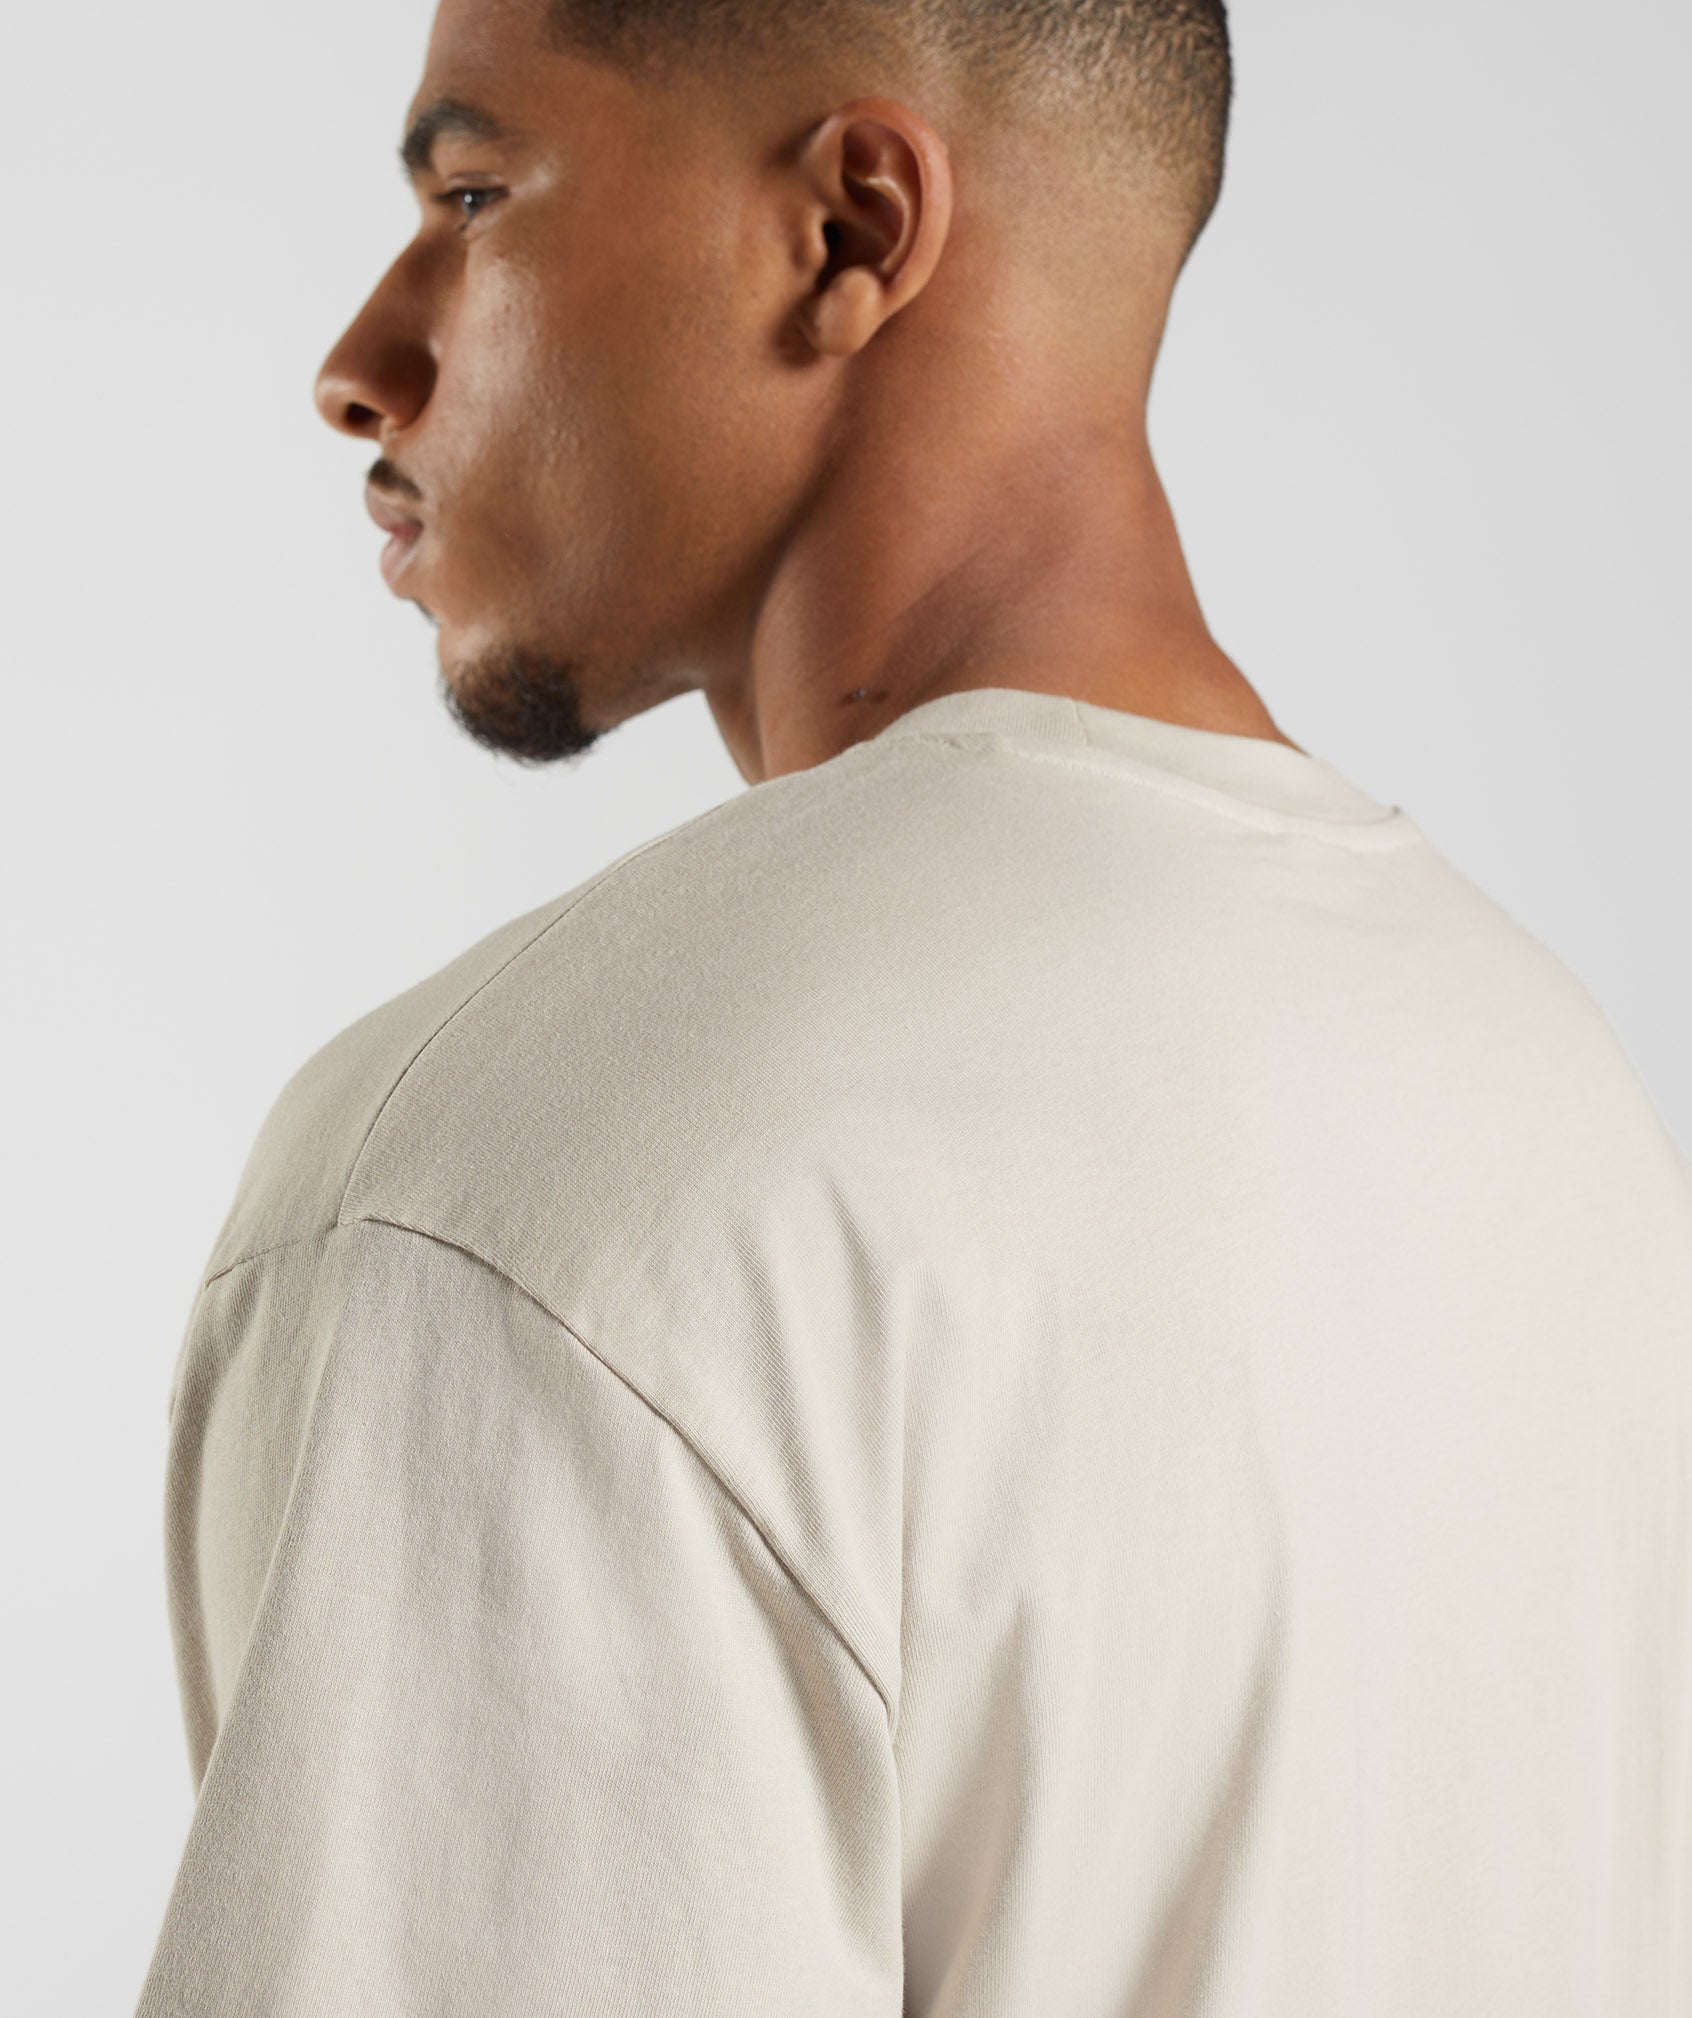 Rest Day Sweats T-Shirt in Pebble Grey - view 7